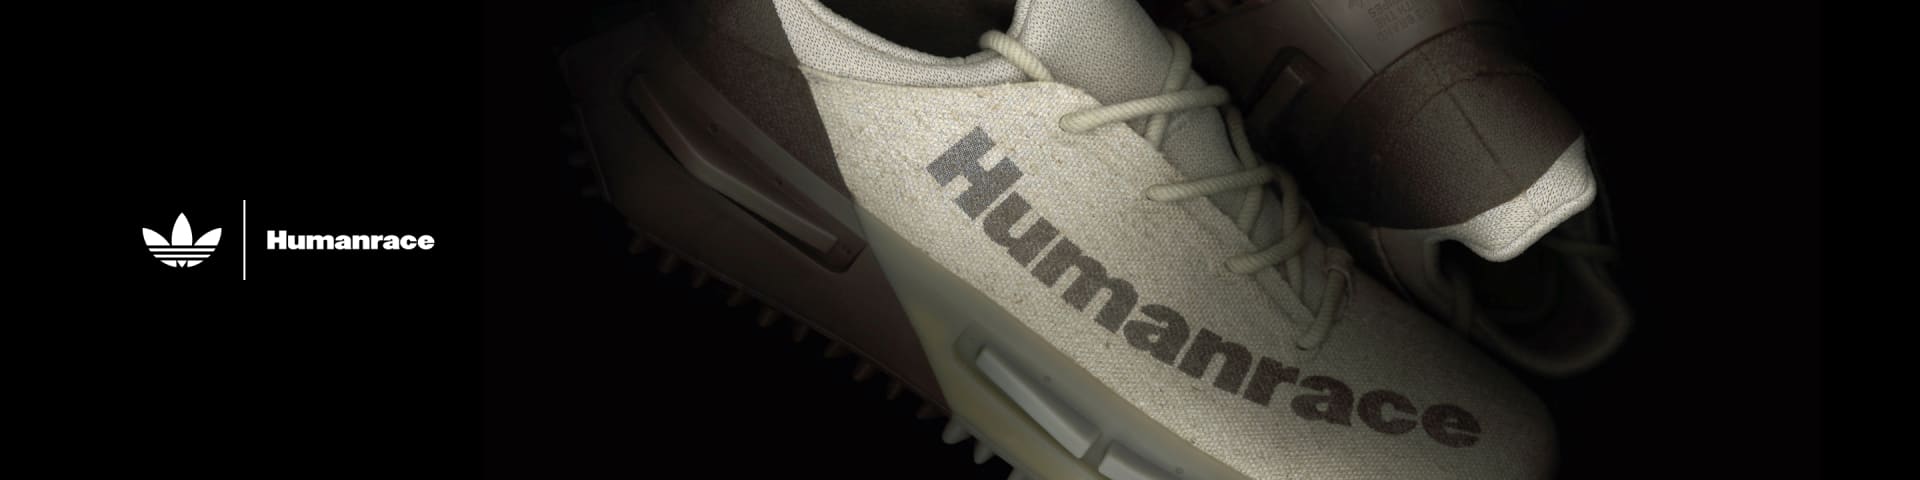 Close zoom of NMD S1 MAHBS by Pharrell shoes in earth tones